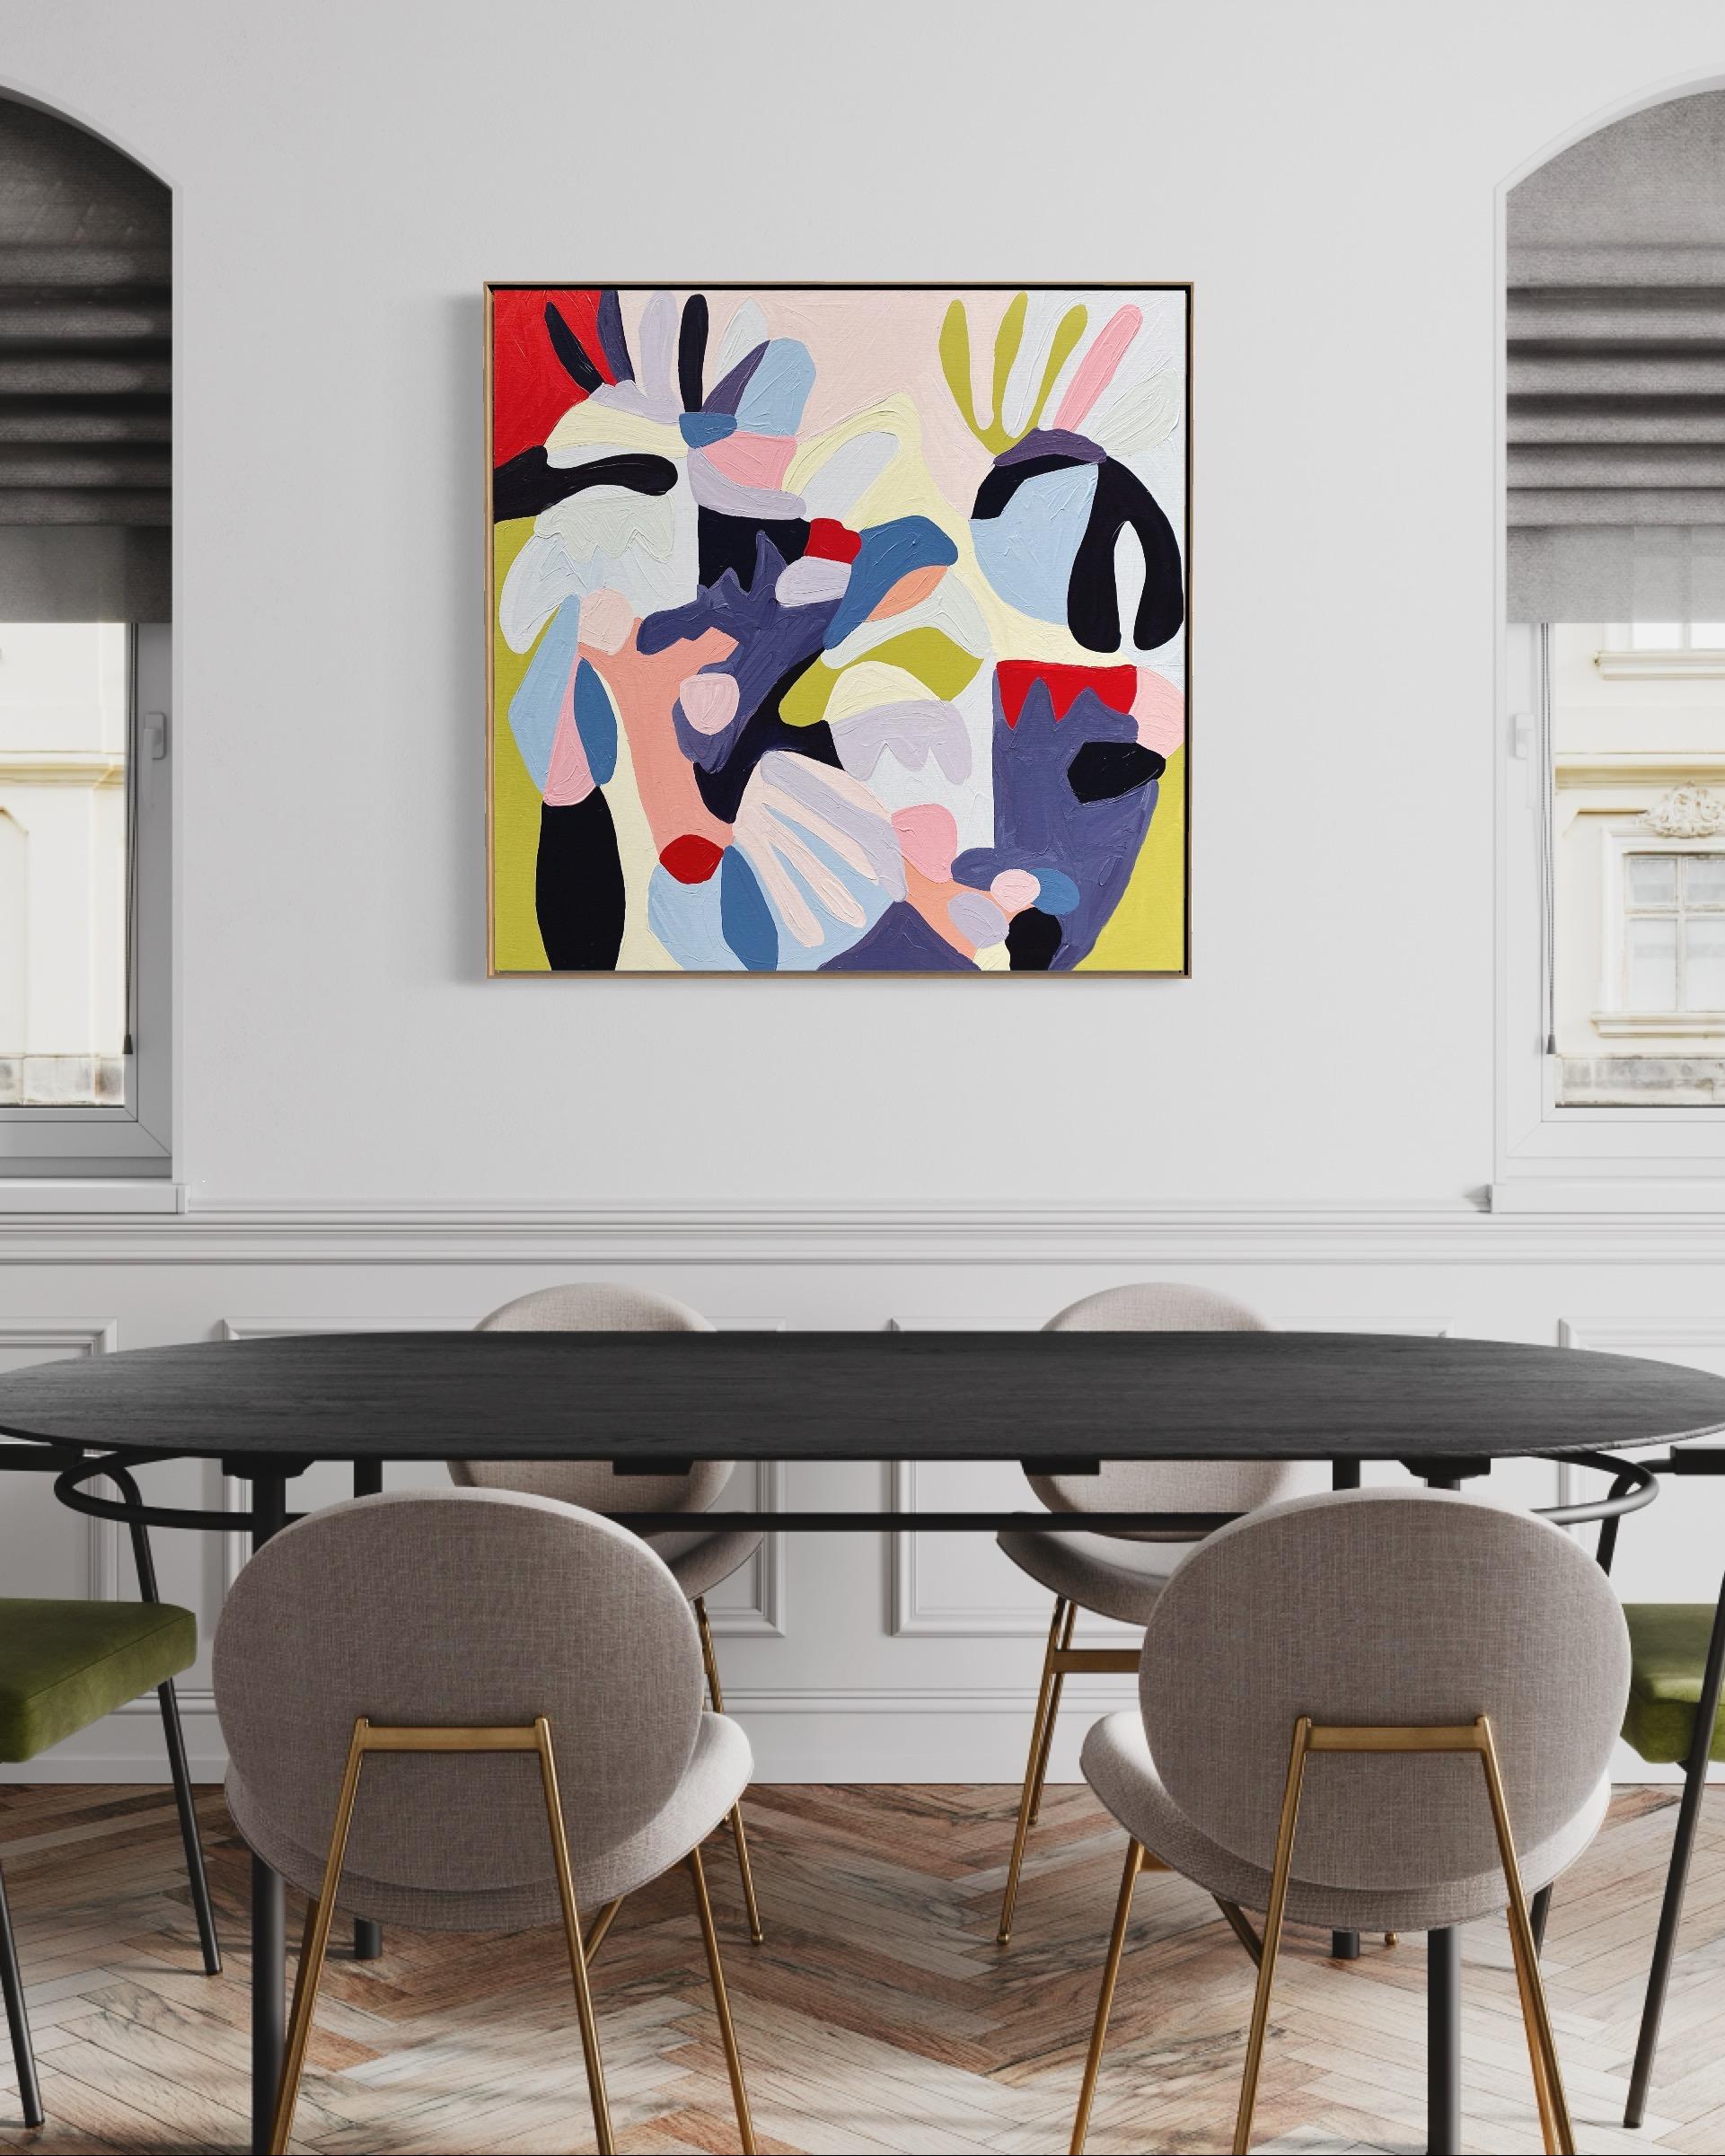 Date Night, Bold Abstract Art, Bright Contemporary Picasso Style Artwork - Painting by Harriet Chomley 